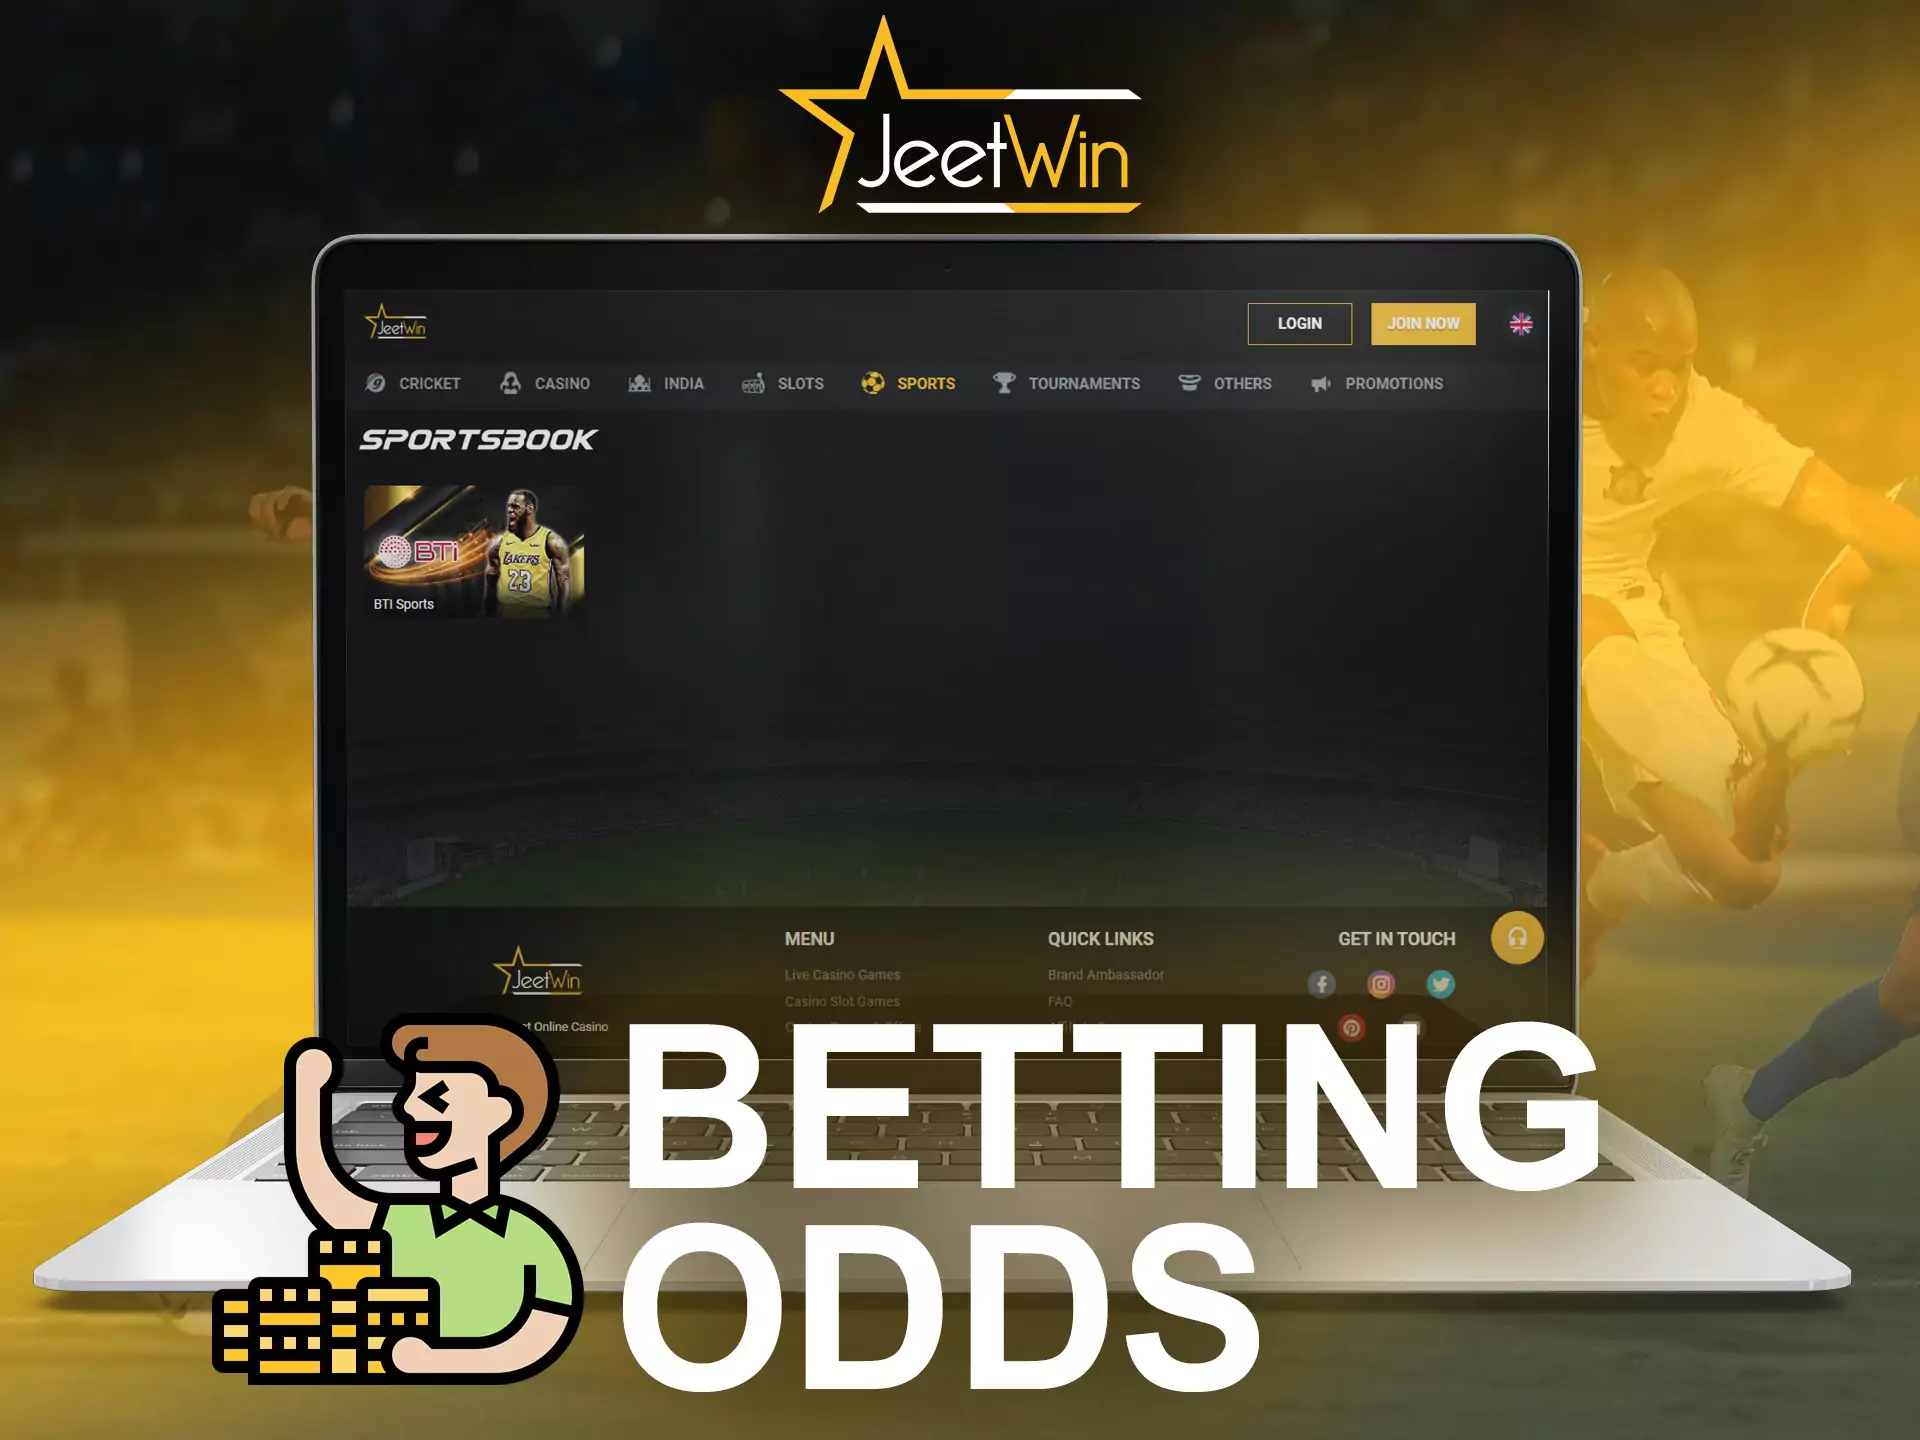 JeetWin provide great odds for each event.